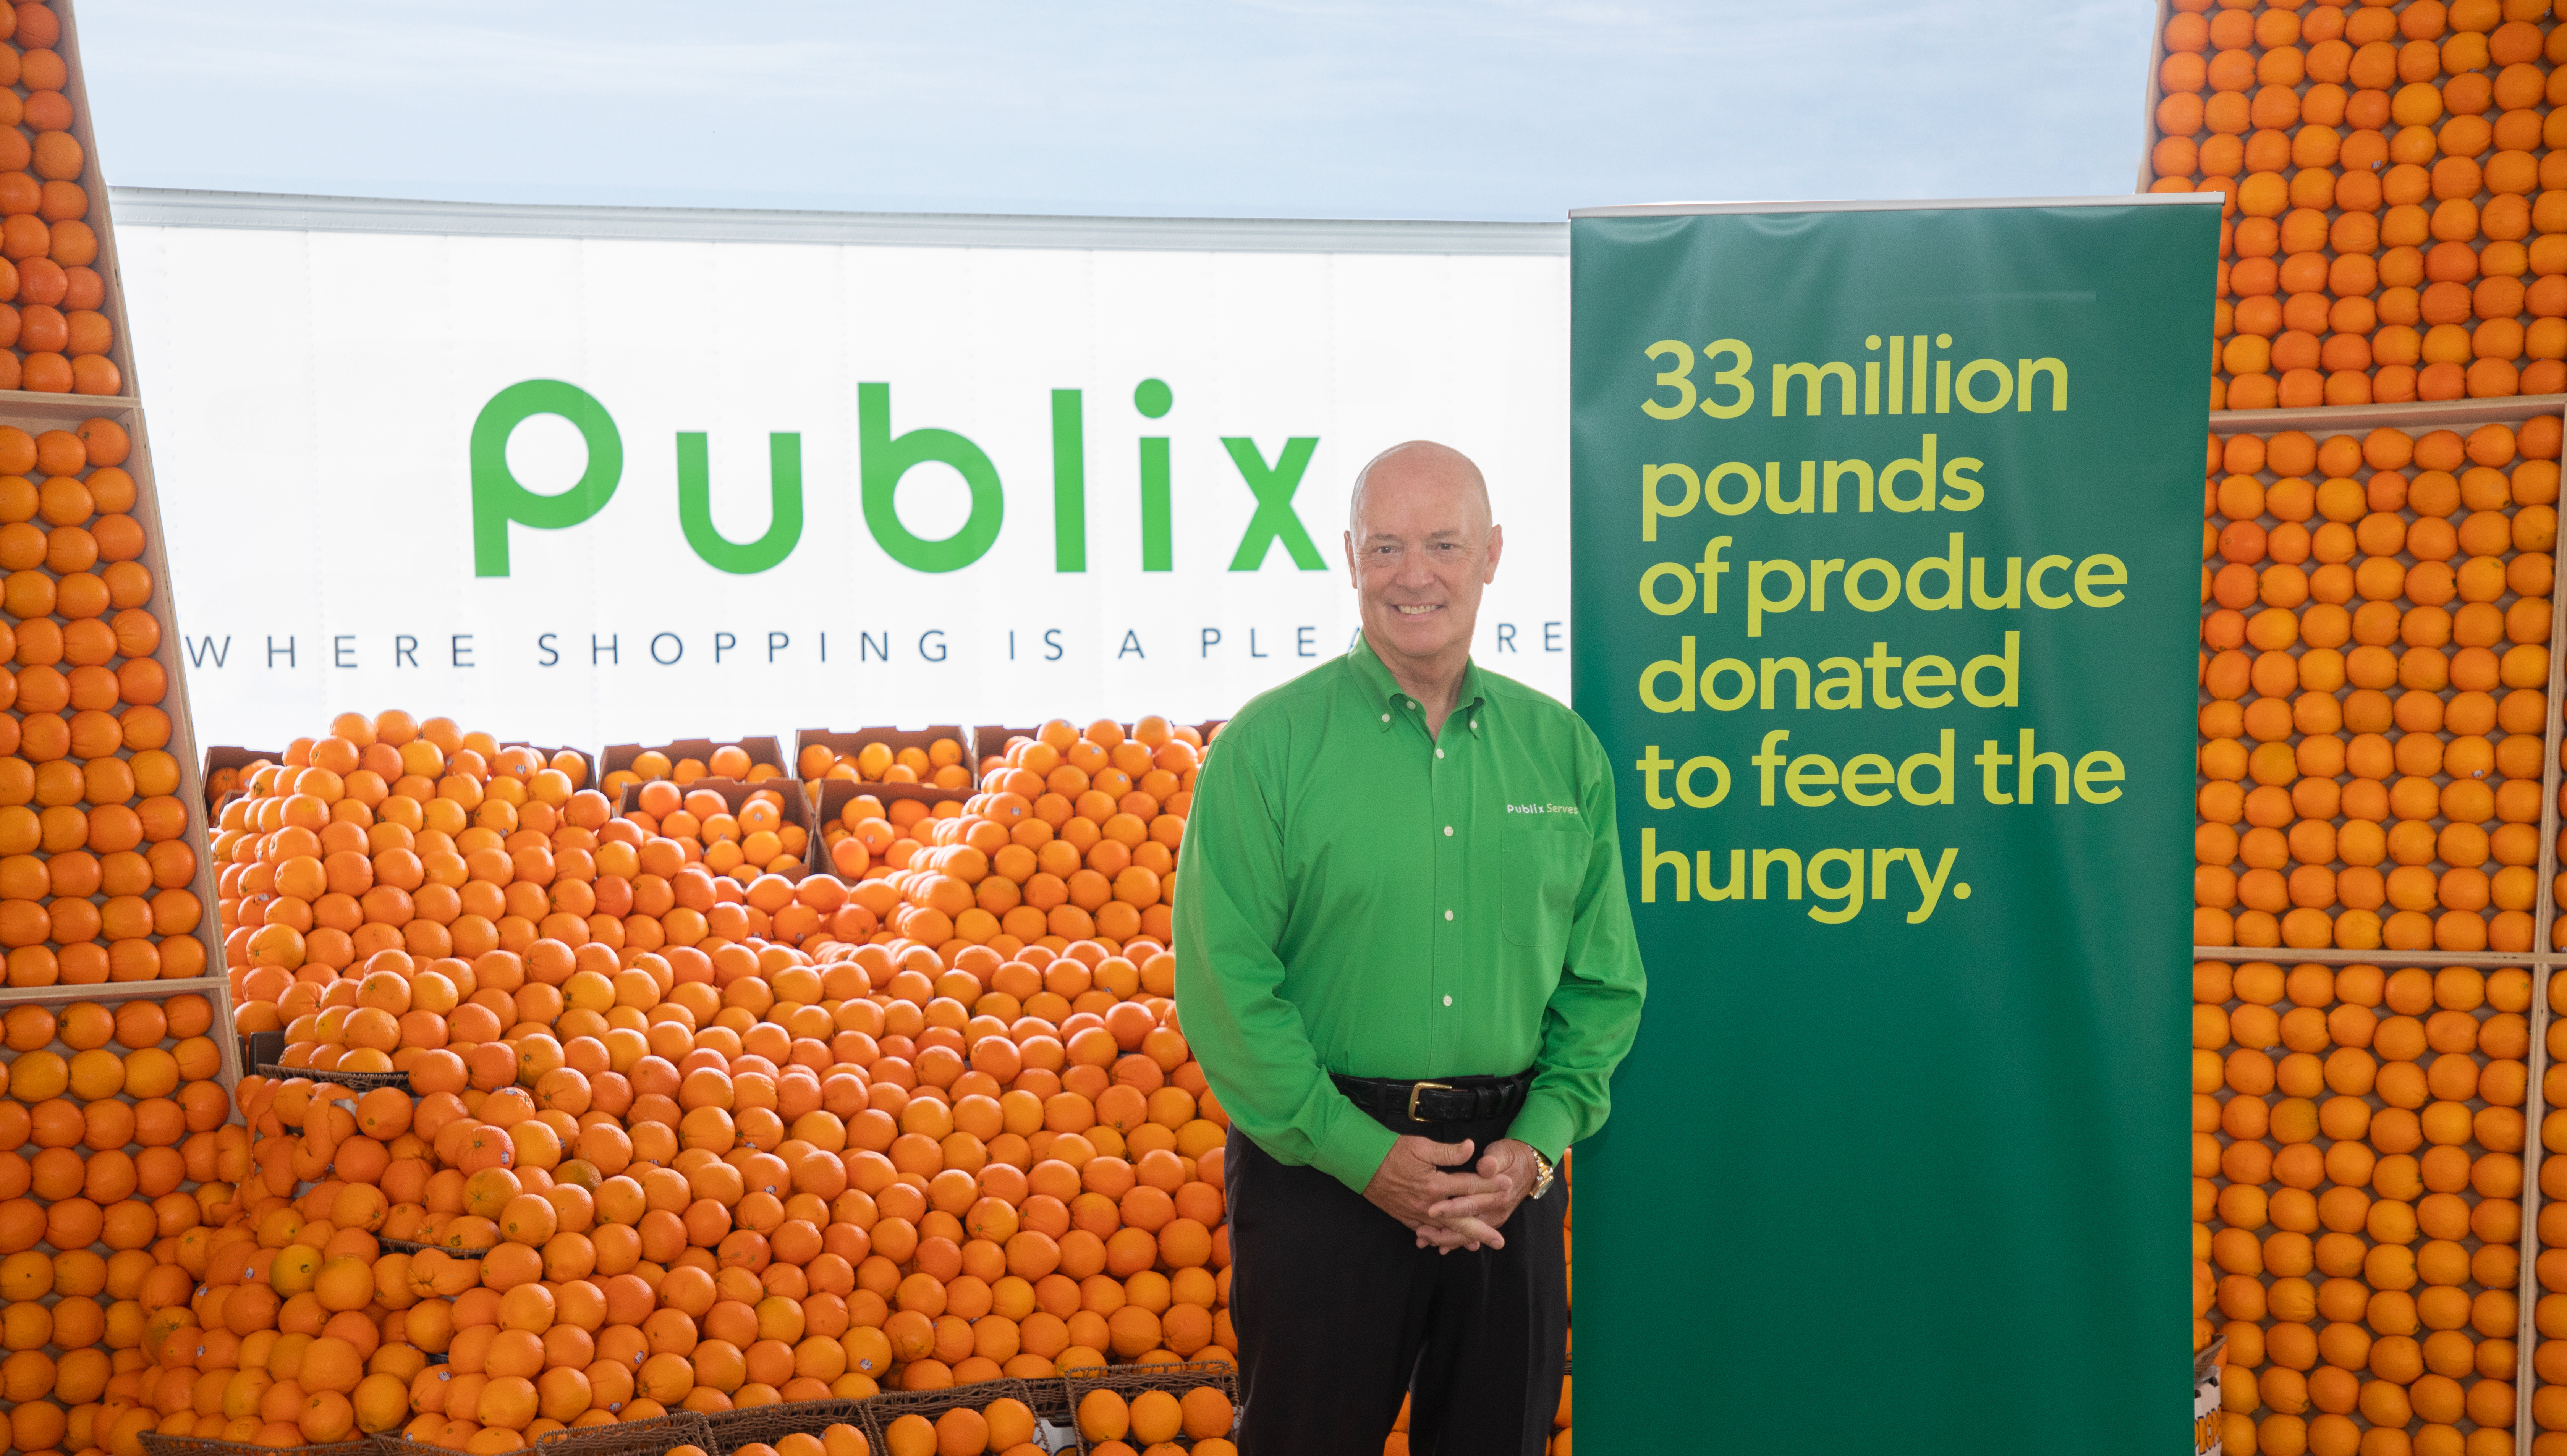 Publix Programs Addressing Food Insecurity - 1